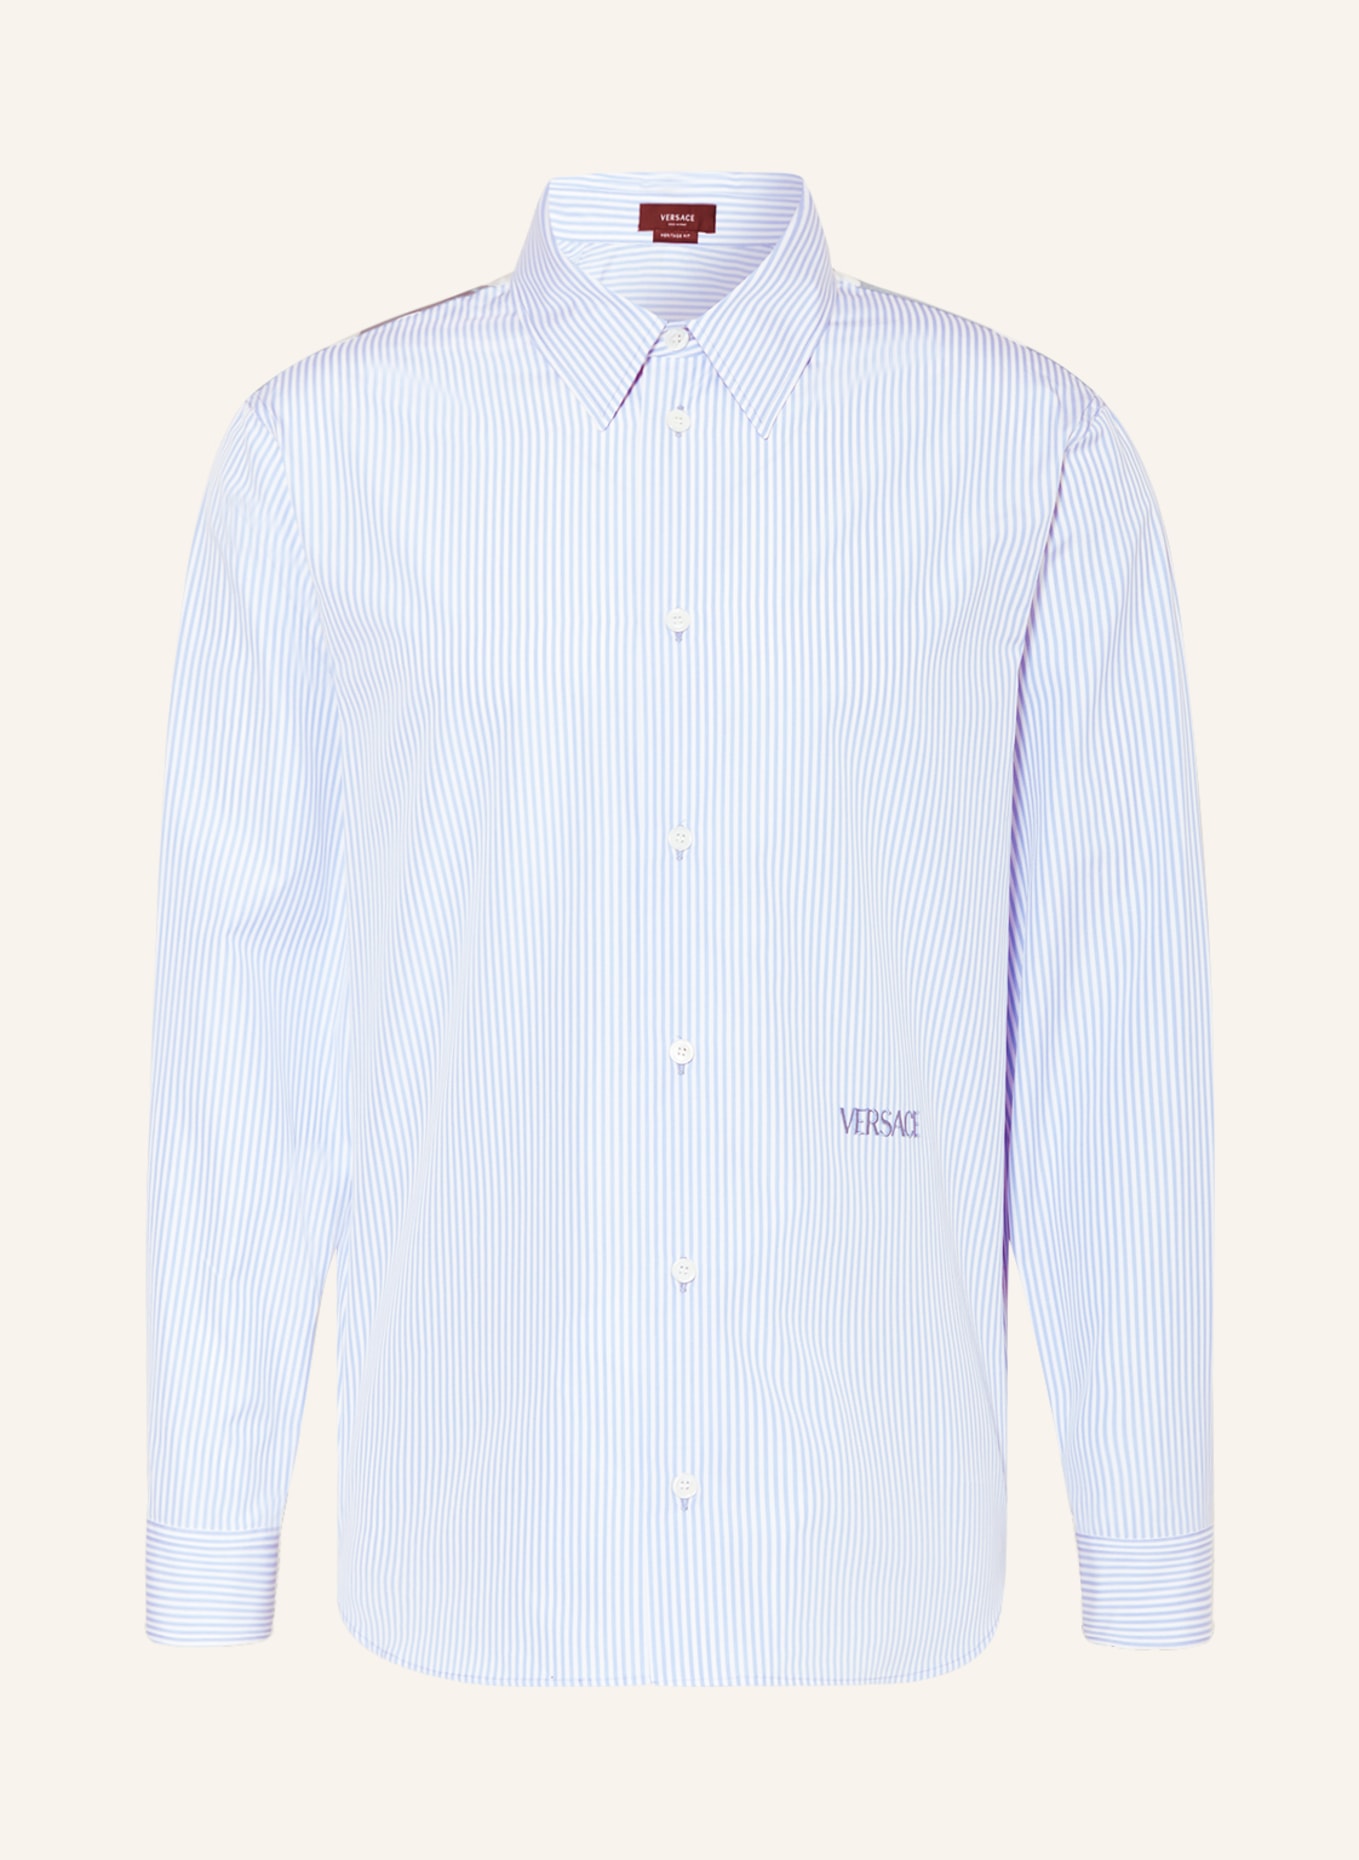 VERSACE Shirt Heritage fit in white/ light blue